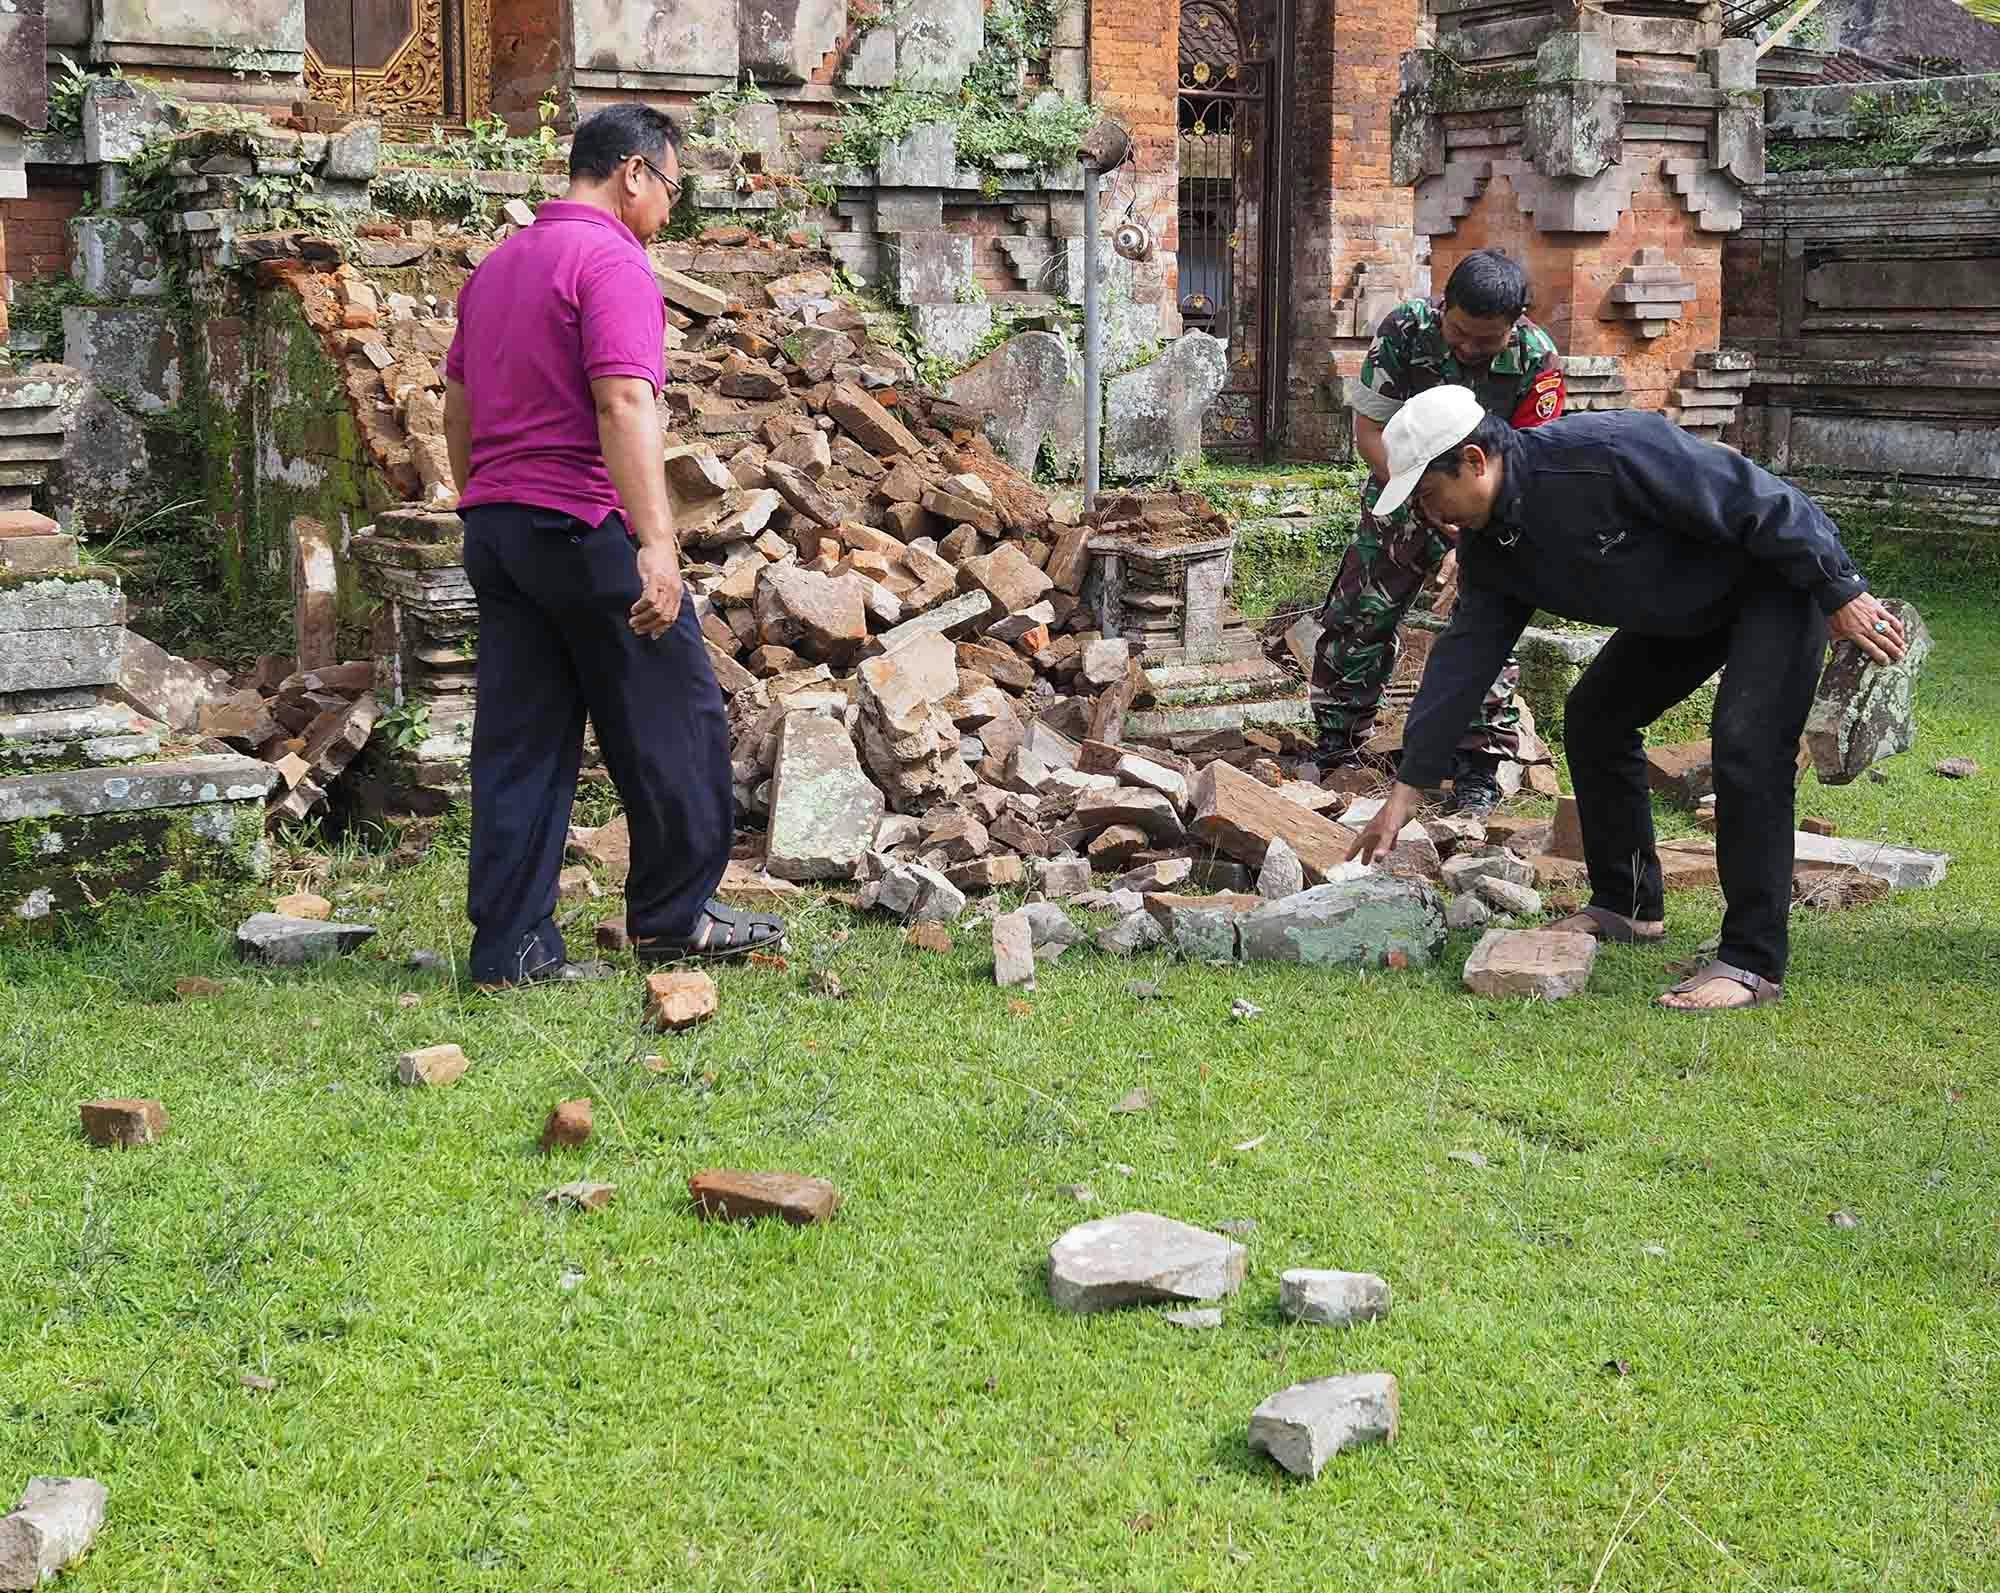 Bali officials inspecting a damaged temple following an earthquake in 2018